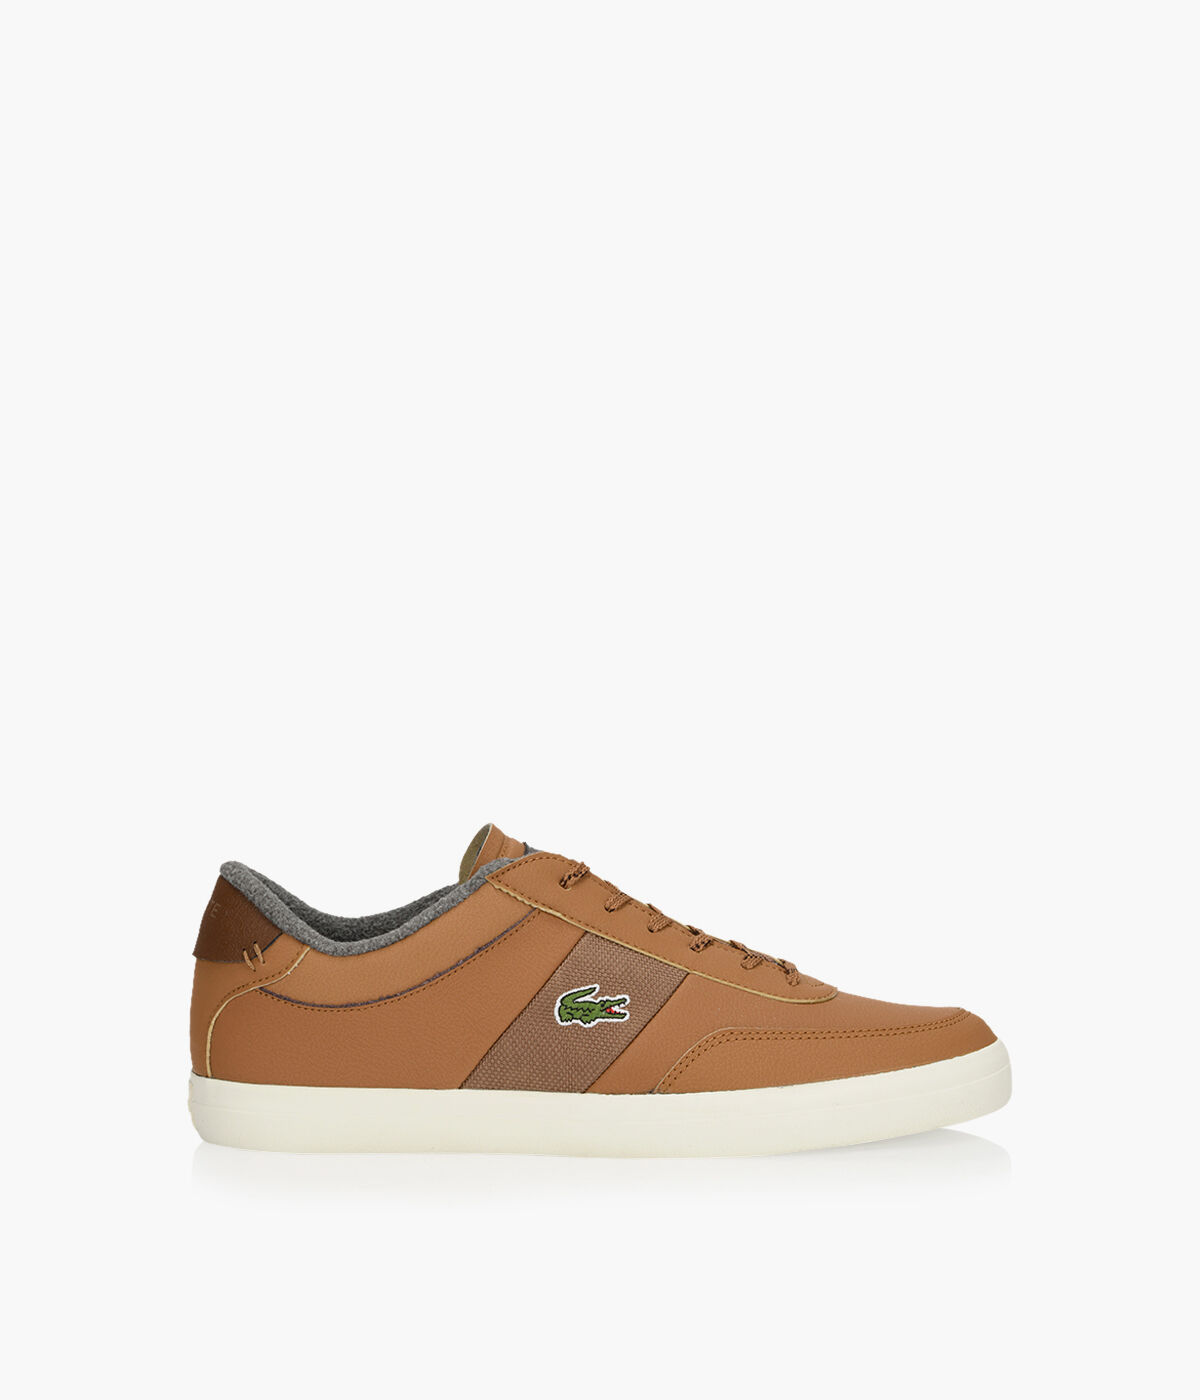 lacoste brown